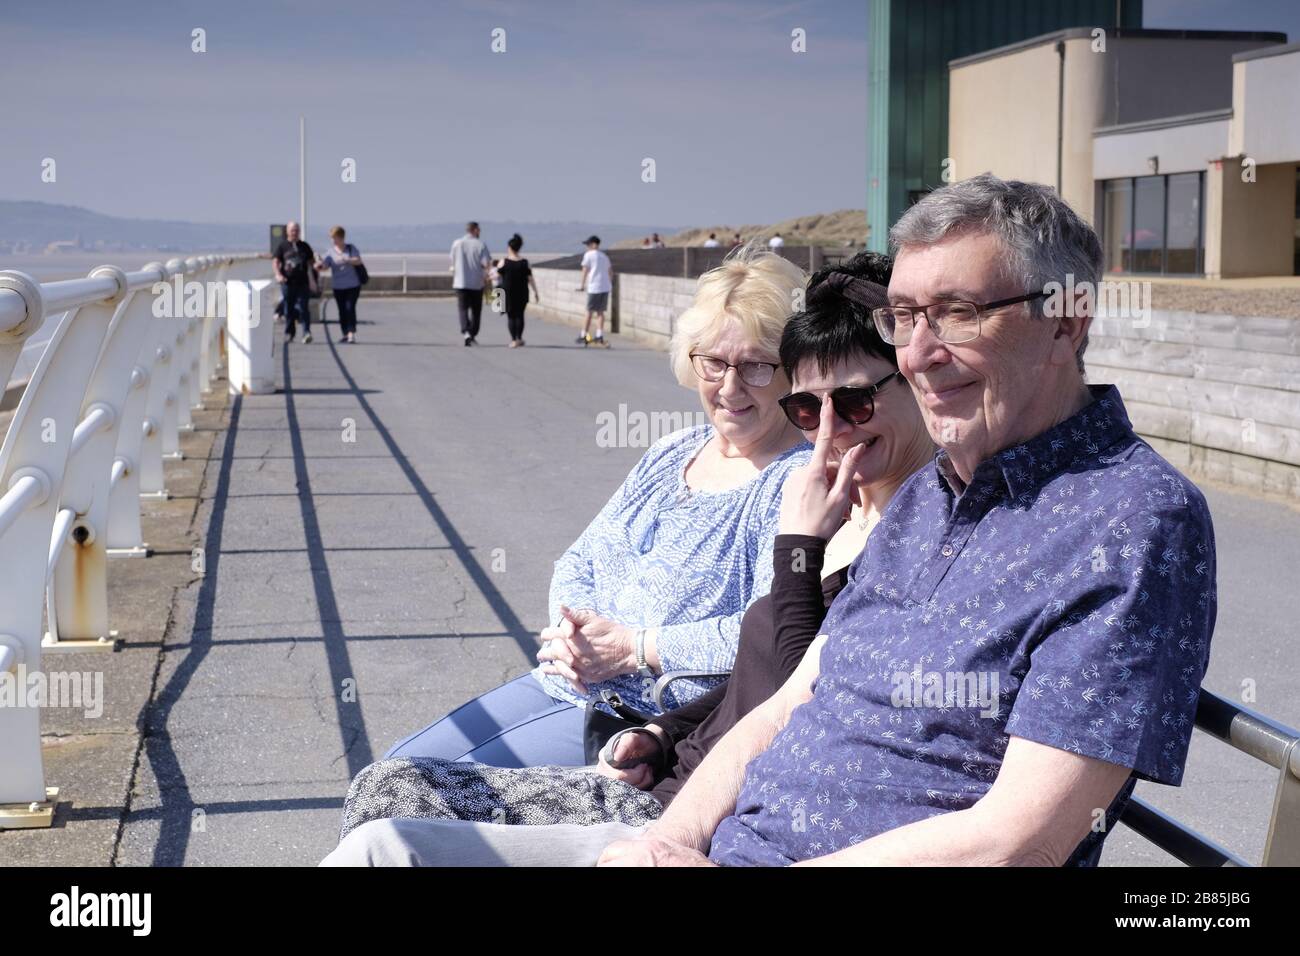 Mother, Father and daughter sat on a bench on the promenade, looking out to sea on a day out Stock Photo